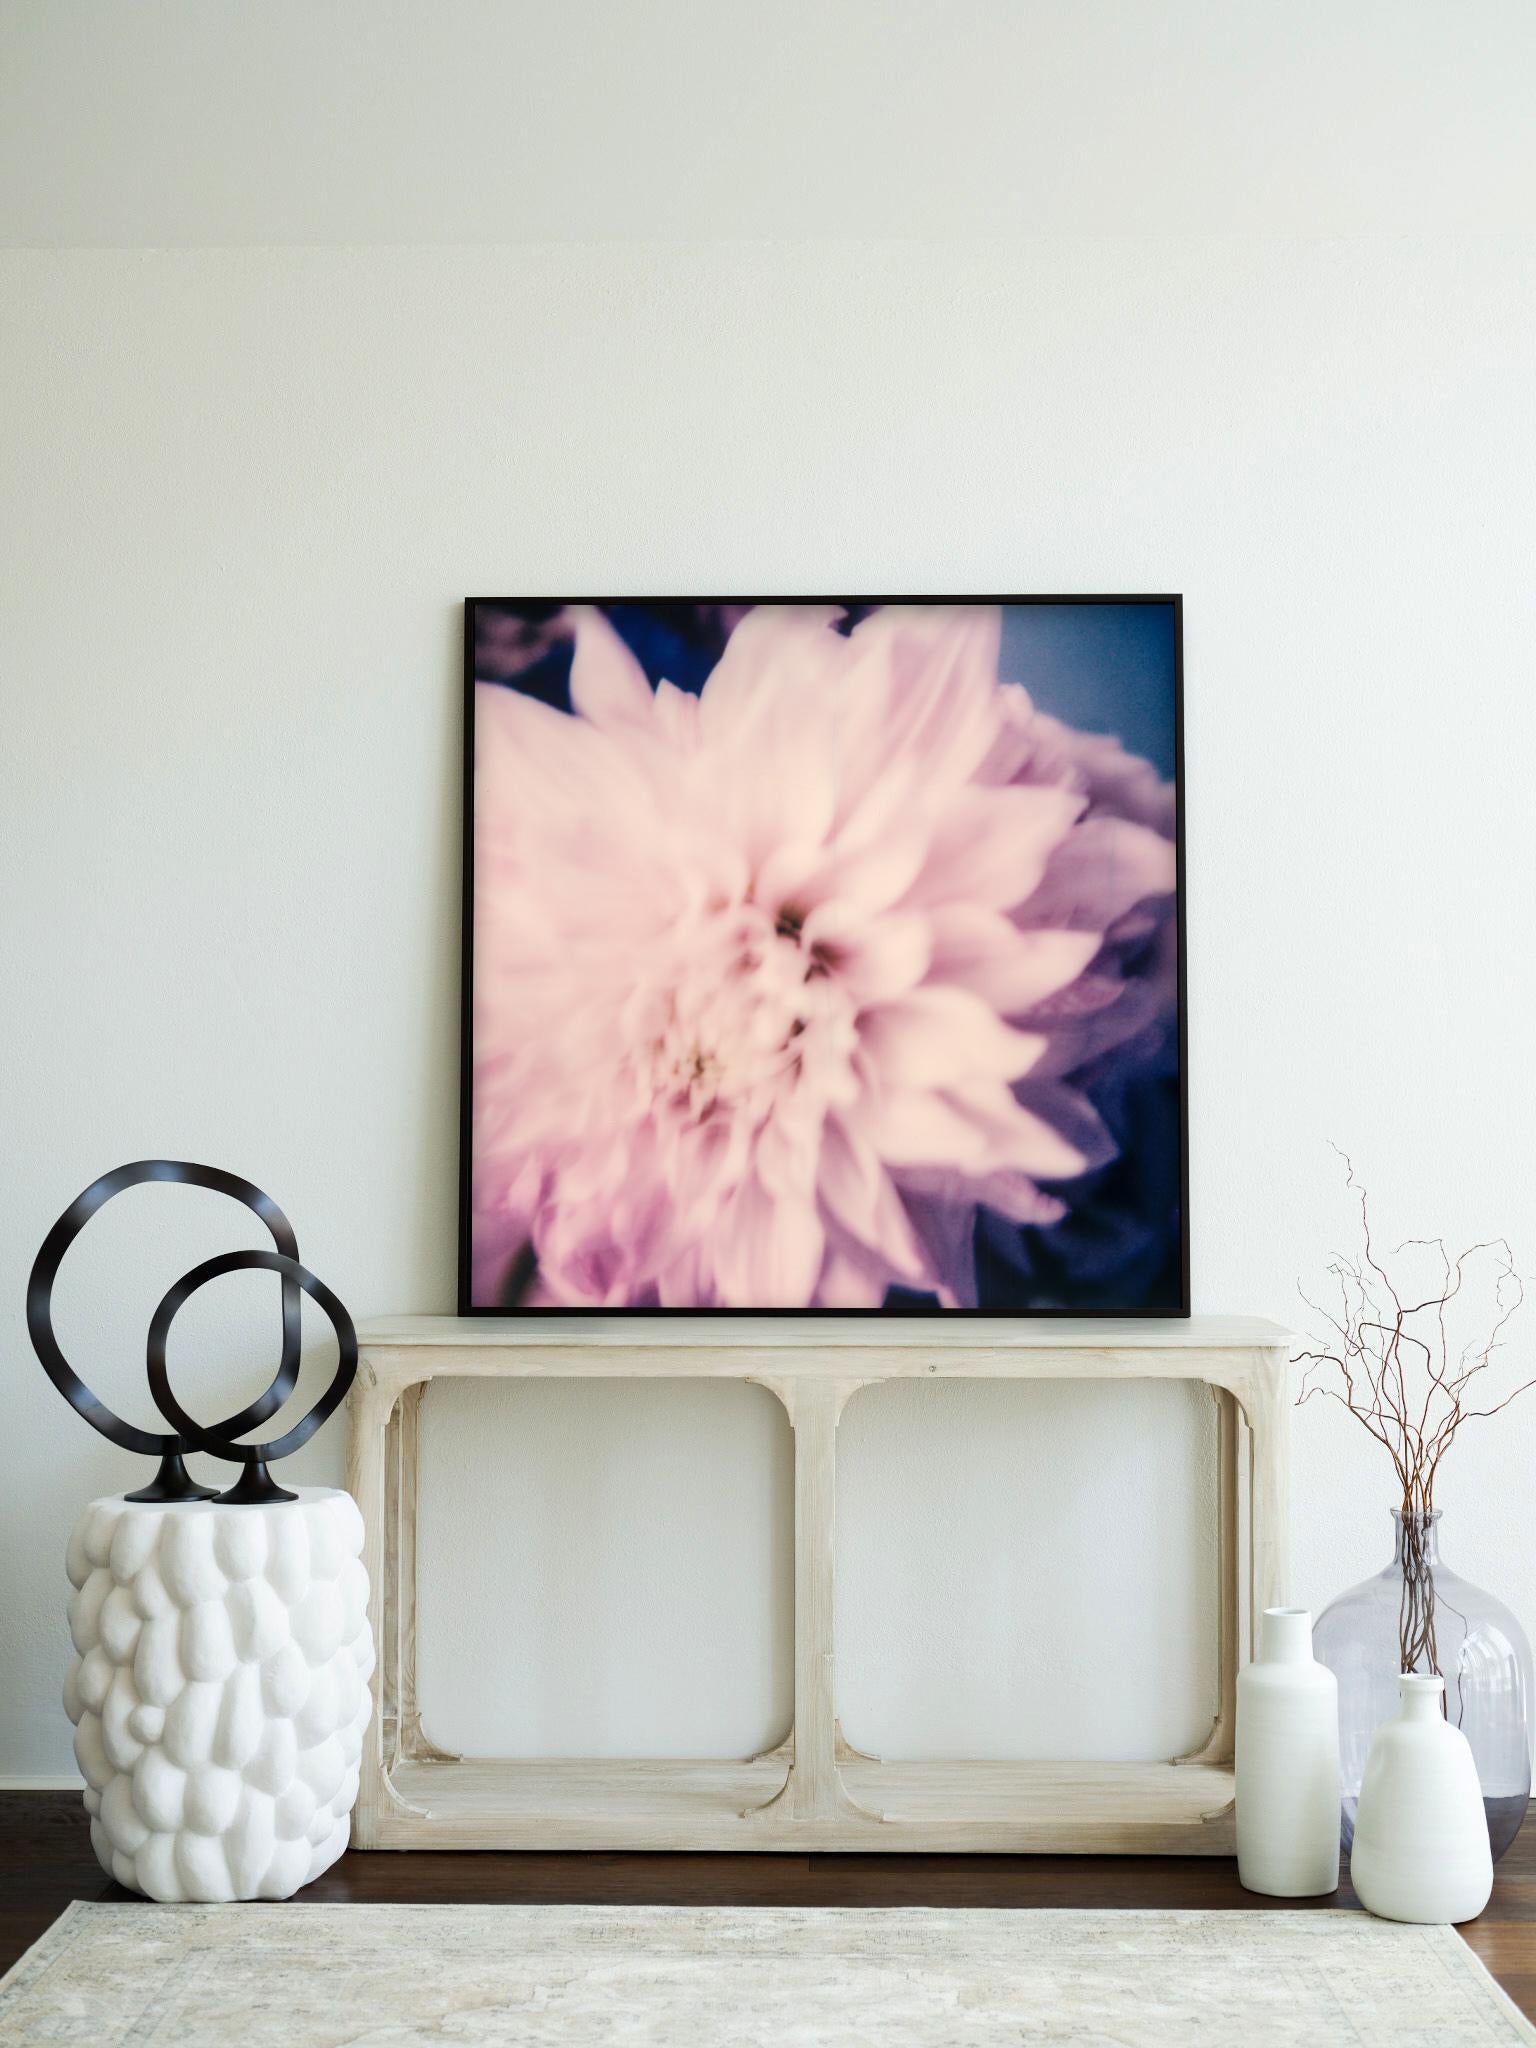 Dahlia - 21st Century Contemporary Photographic Floral Print from Color Polaroid - Beige Figurative Photograph by Pia Clodi